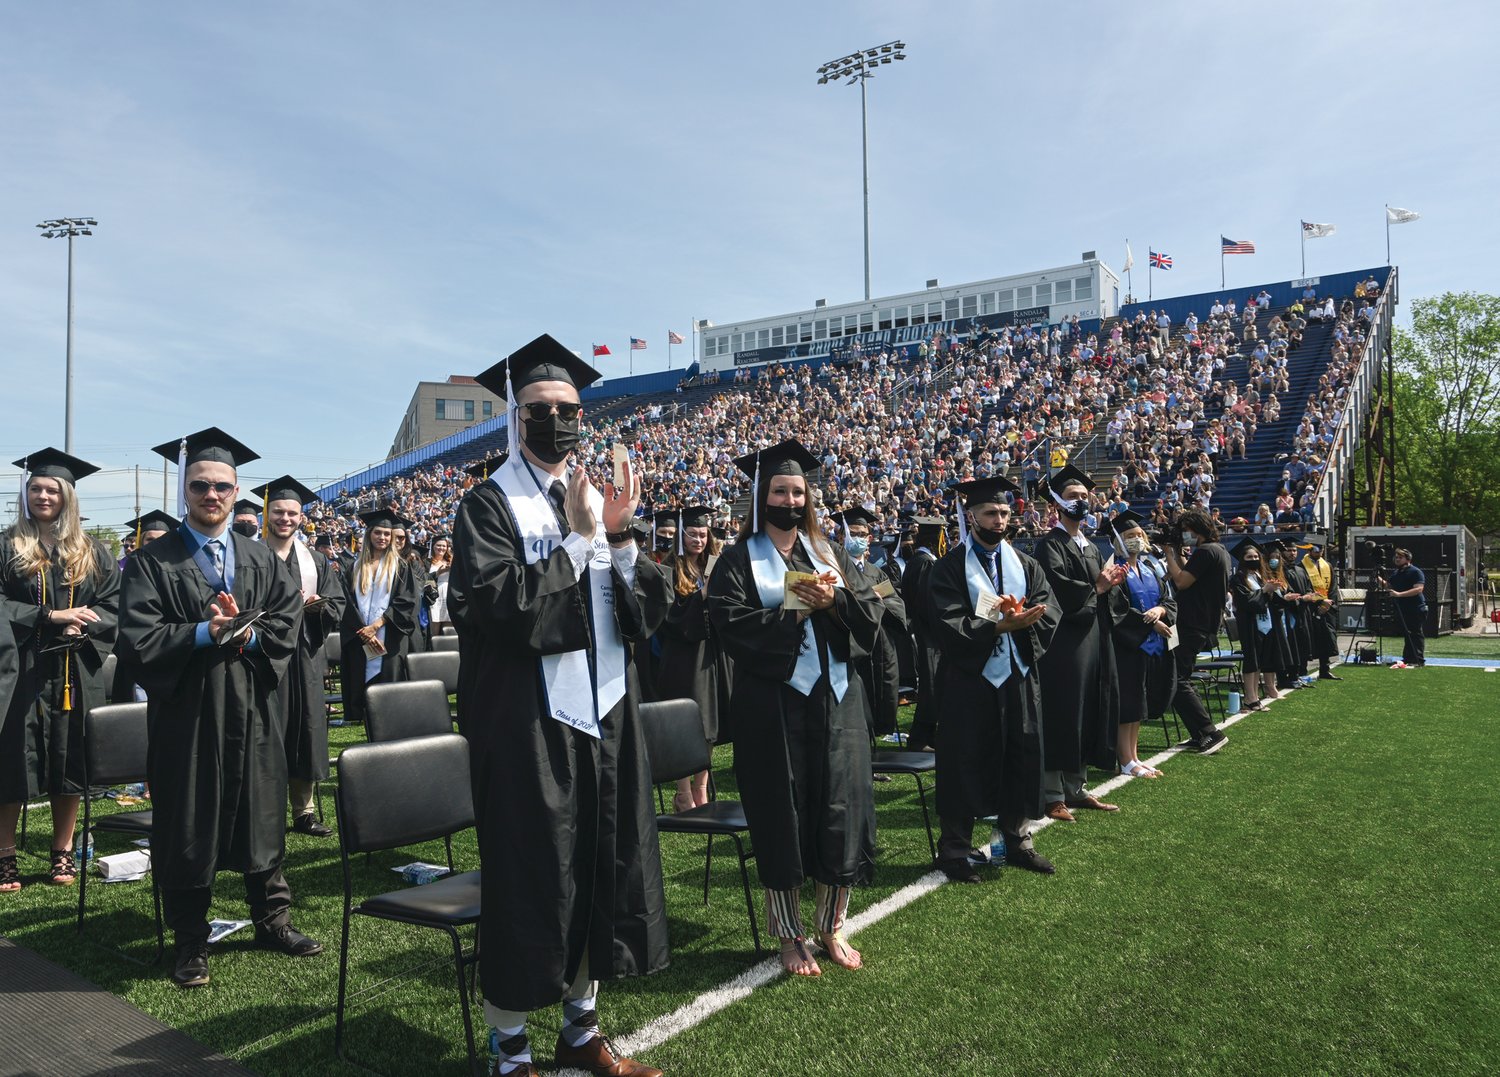 University of Rhode Island graduates from the College of Arts and Sciences celebrate their accomplishments on a beautiful day in May 2021 at Meade Stadium.